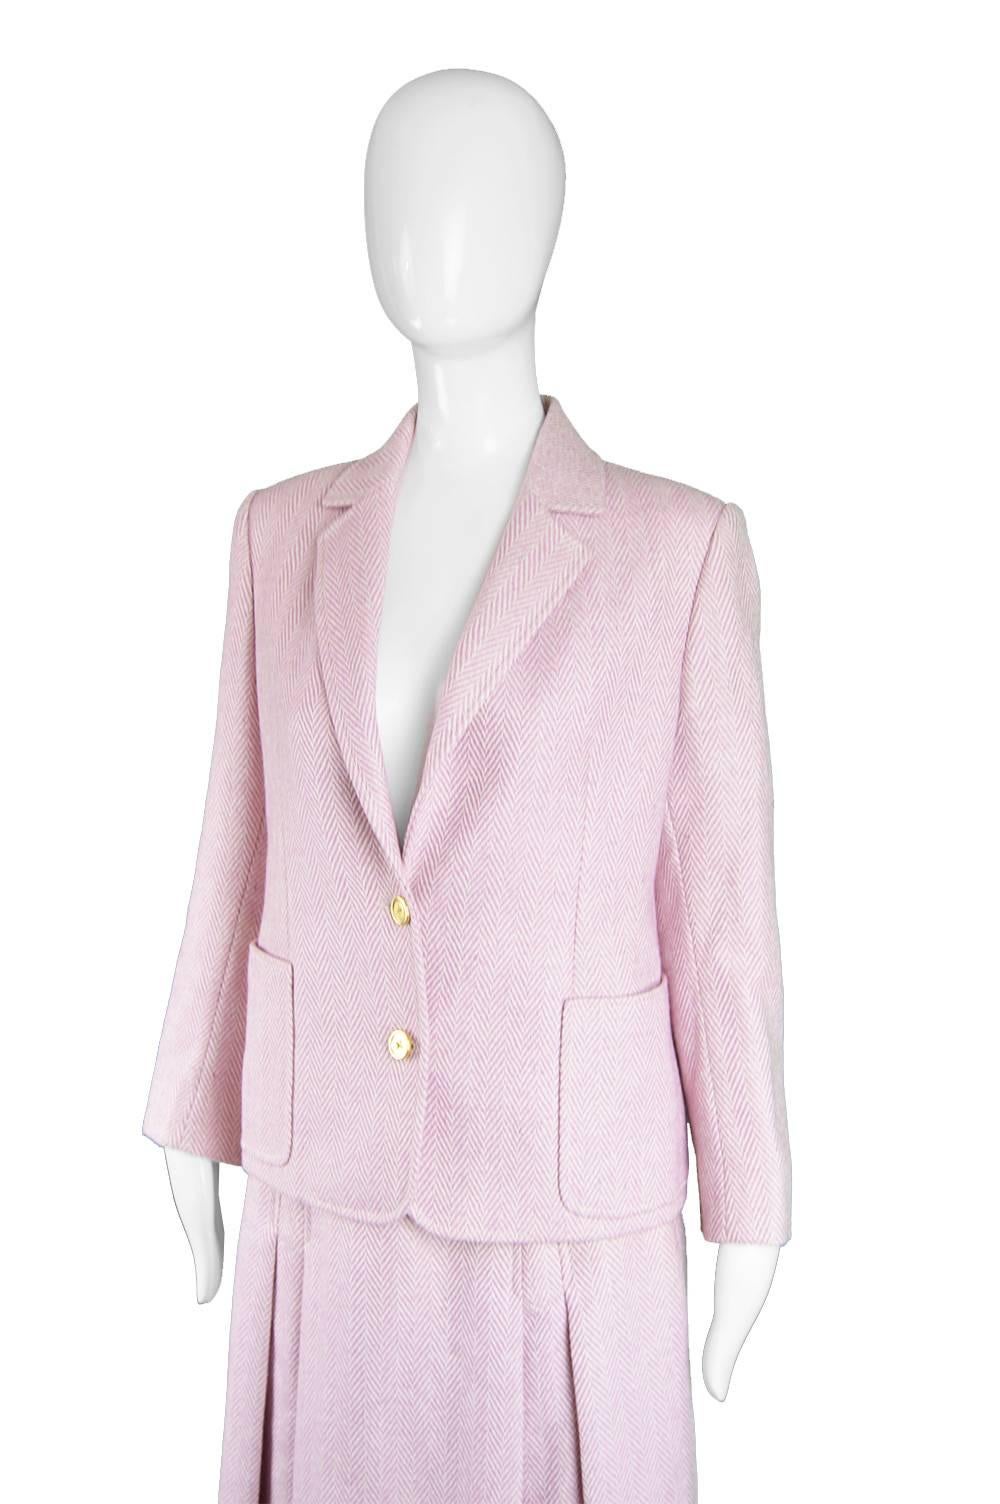 Celine Vintage Pink and White Silk and Wool Herringbone Tweed Skirt Suit, 1980s In Excellent Condition For Sale In Doncaster, South Yorkshire